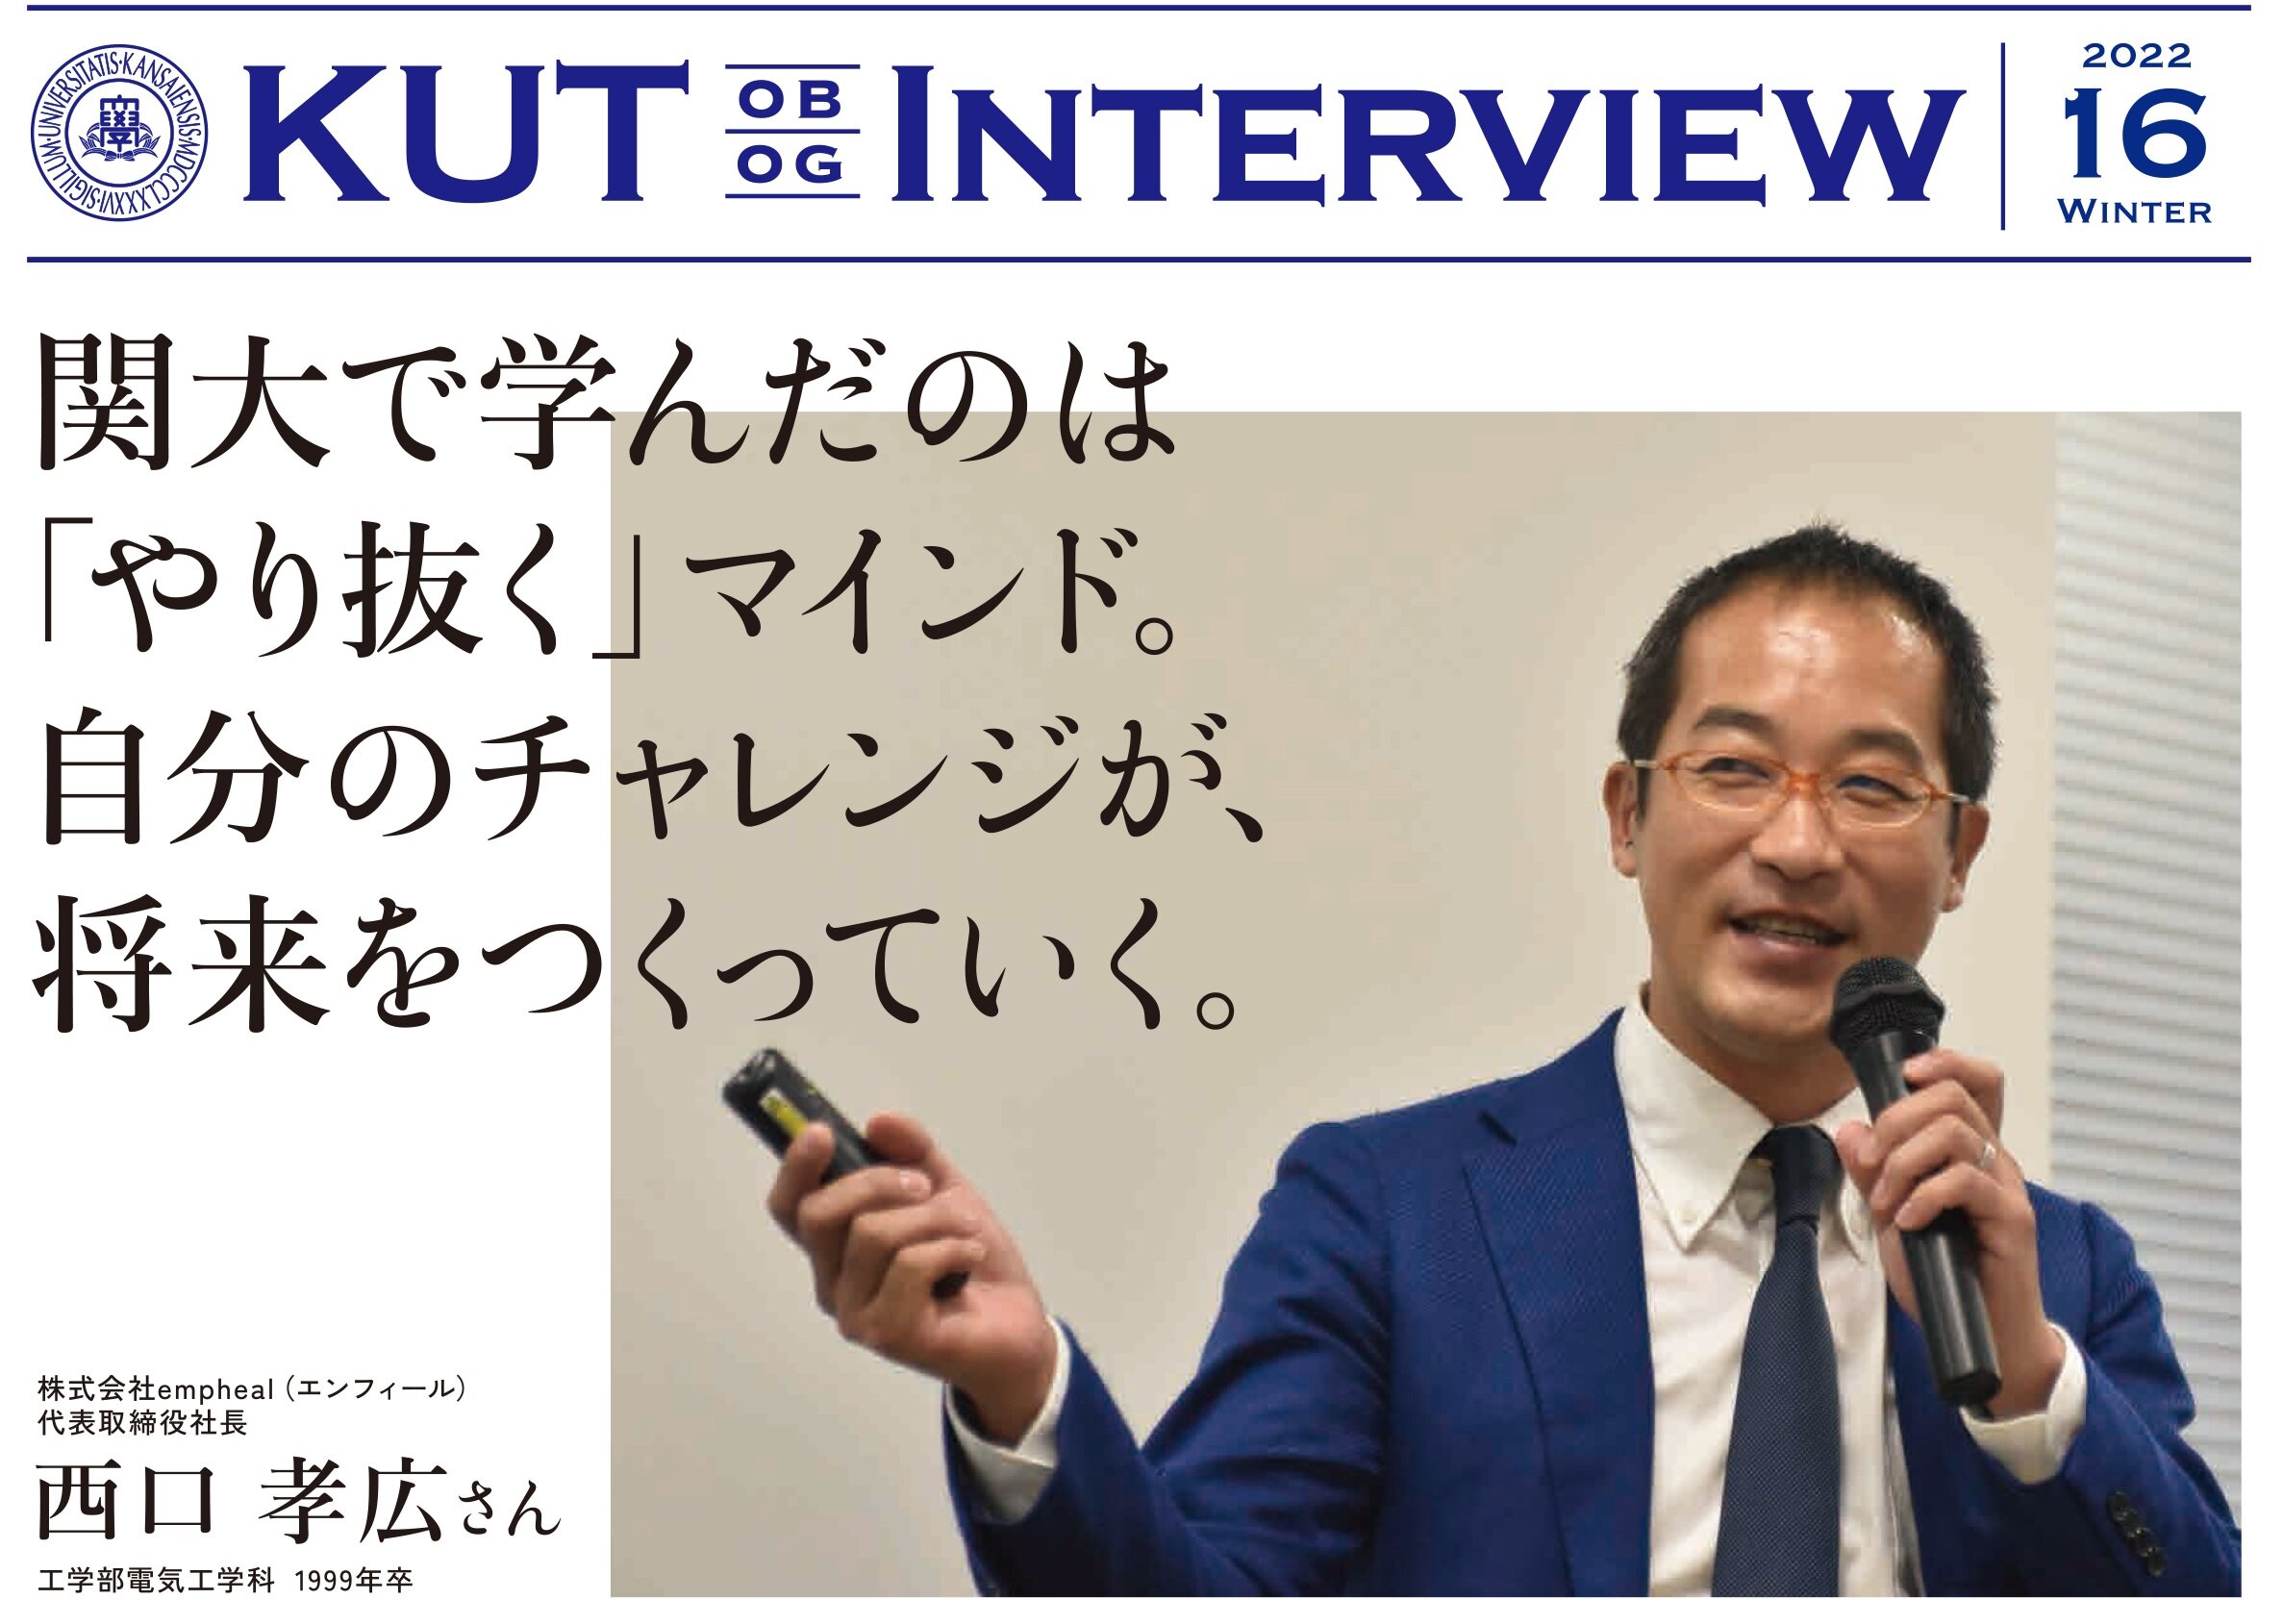 〈KUT INTERVIEW 第１６号〉首都圏で活躍する卒業生をご紹介します！